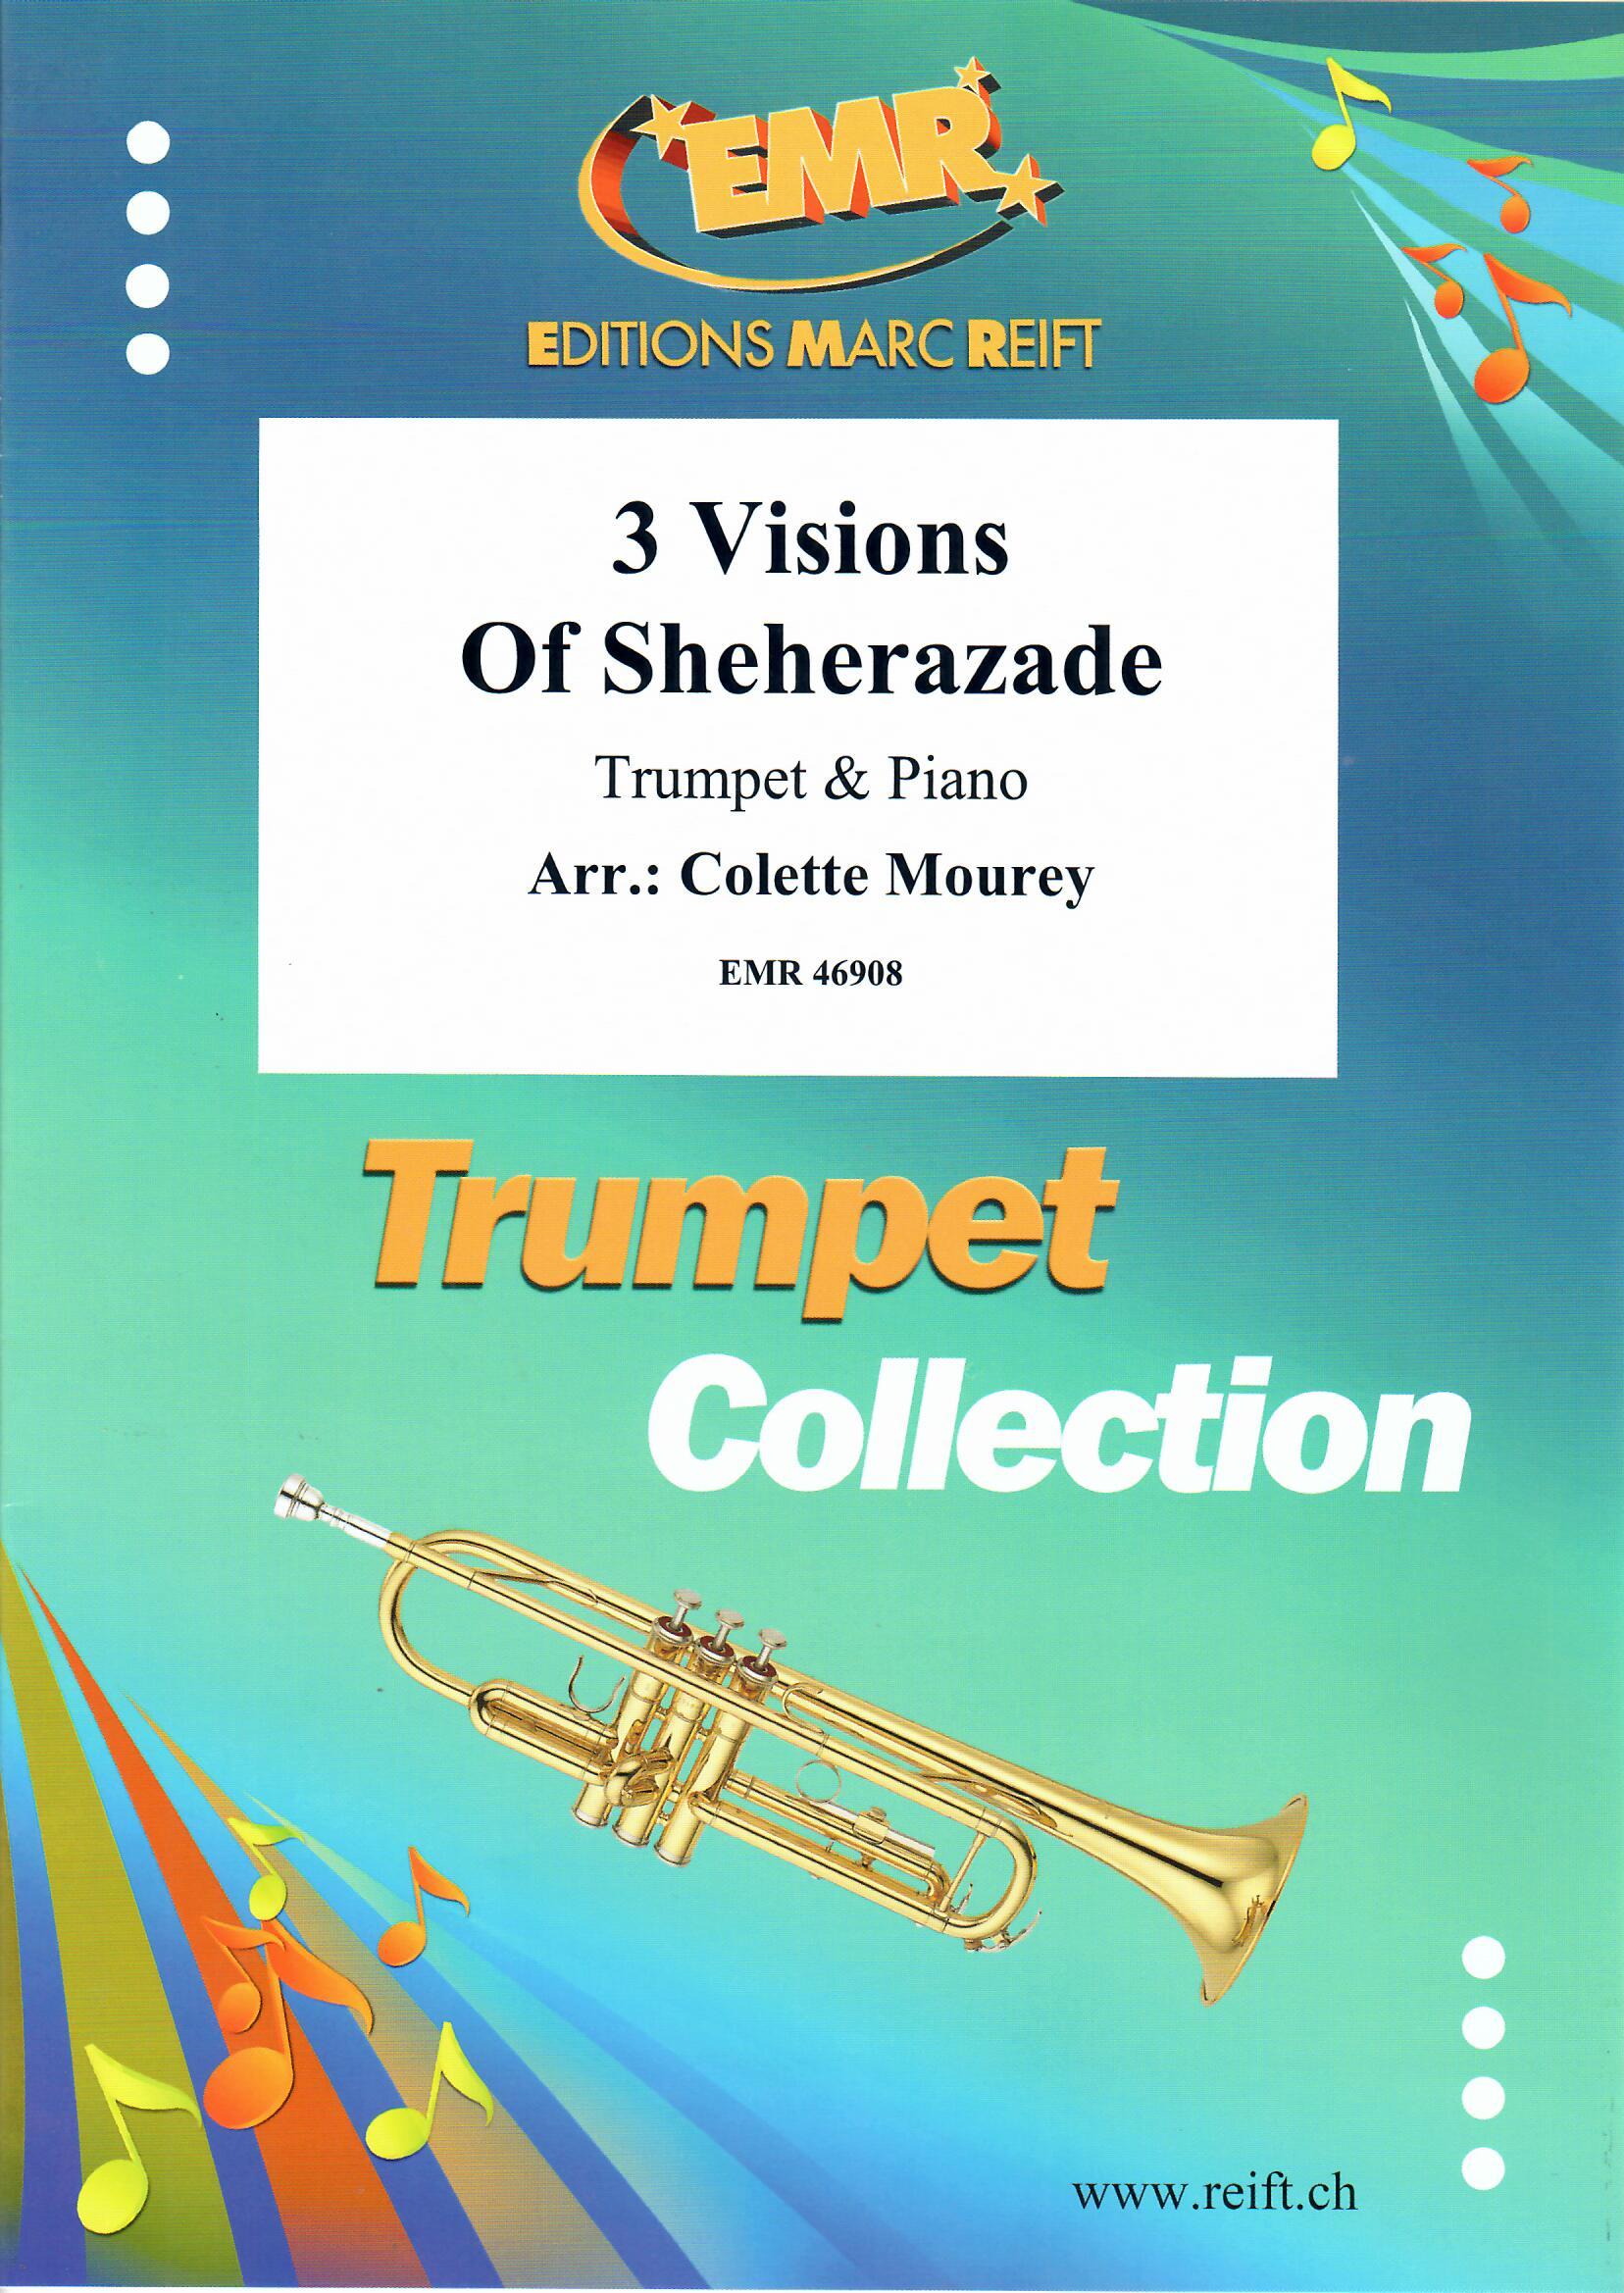 3 VISIONS OF SHEHERAZADE - Trumpet & Piano